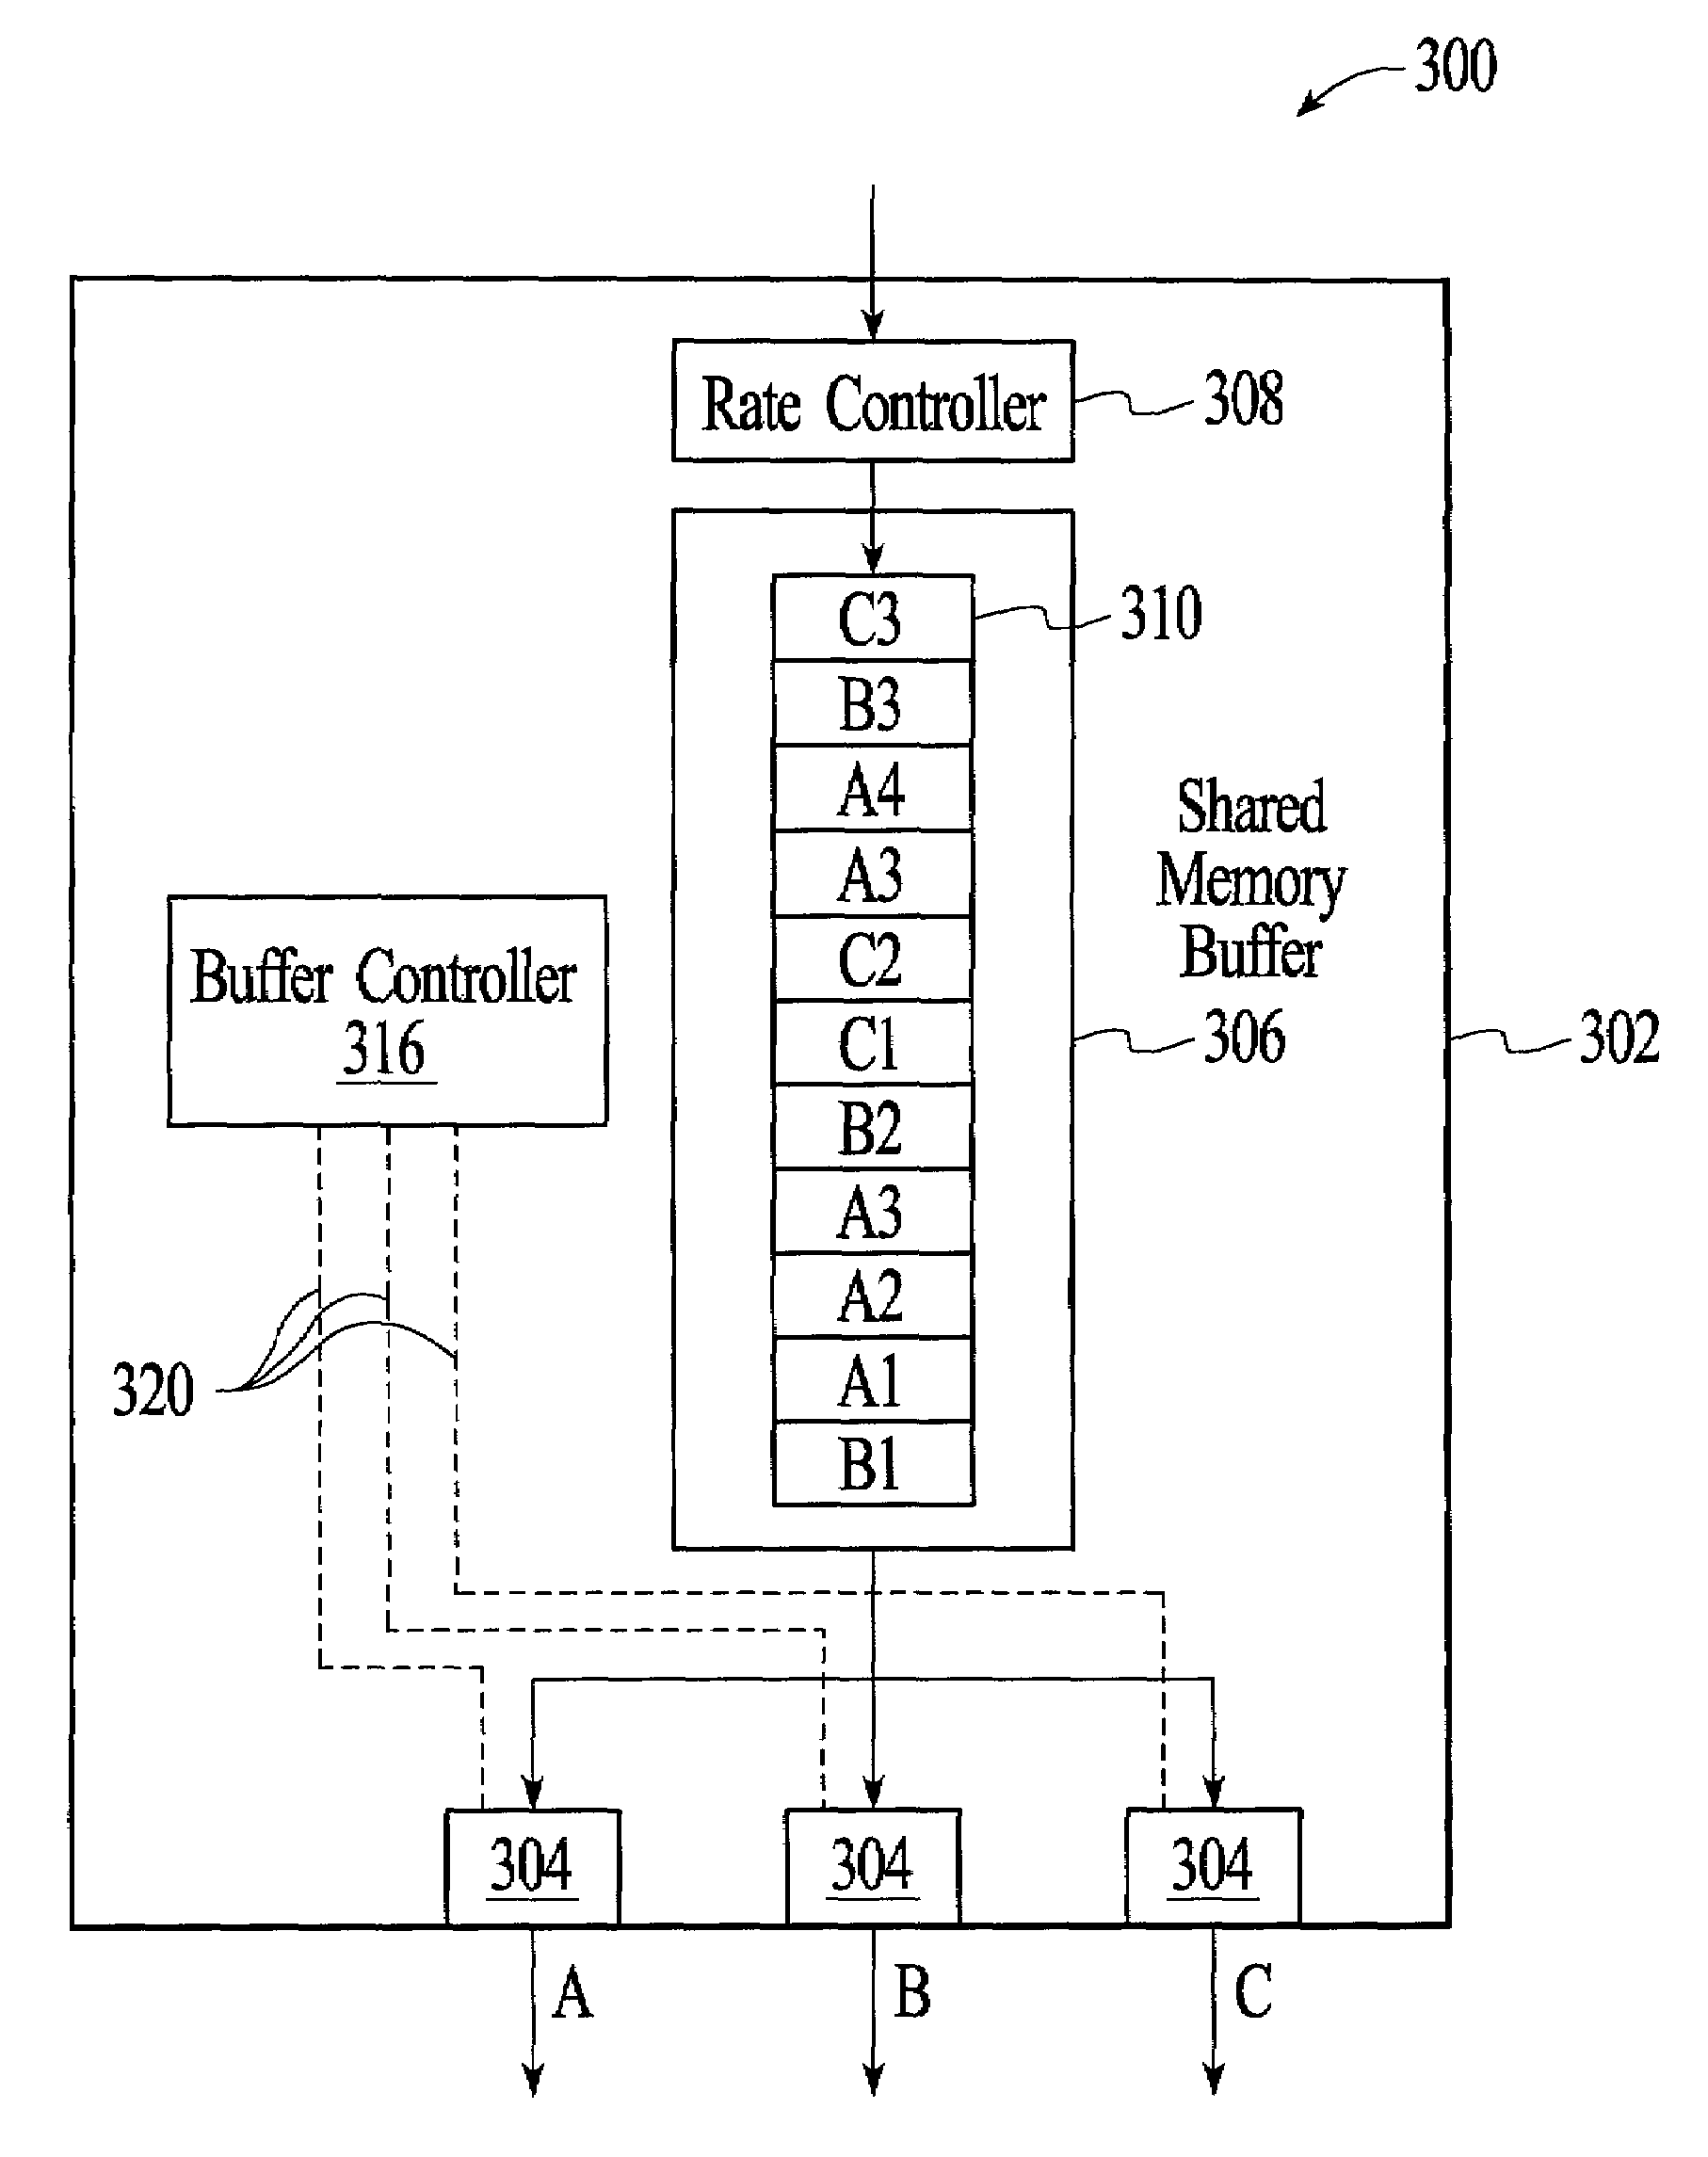 Method and system for managing packets in a shared memory buffer that serves multiple output links